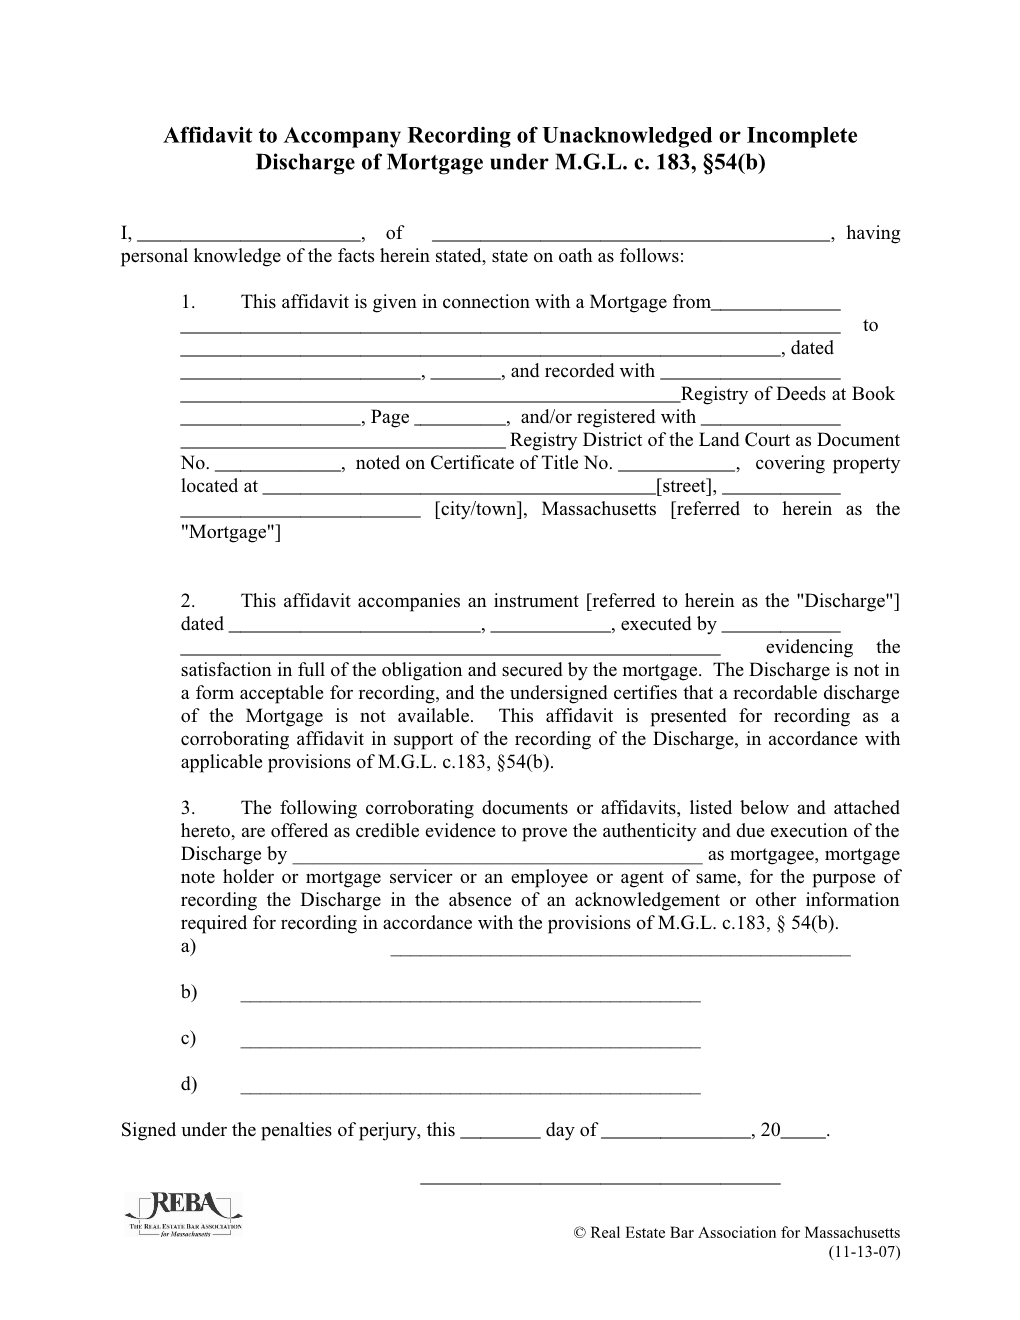 Affidavit to Accompany Recording of Unacknowledged Or Incomplete Discharge of Mortgage Under M